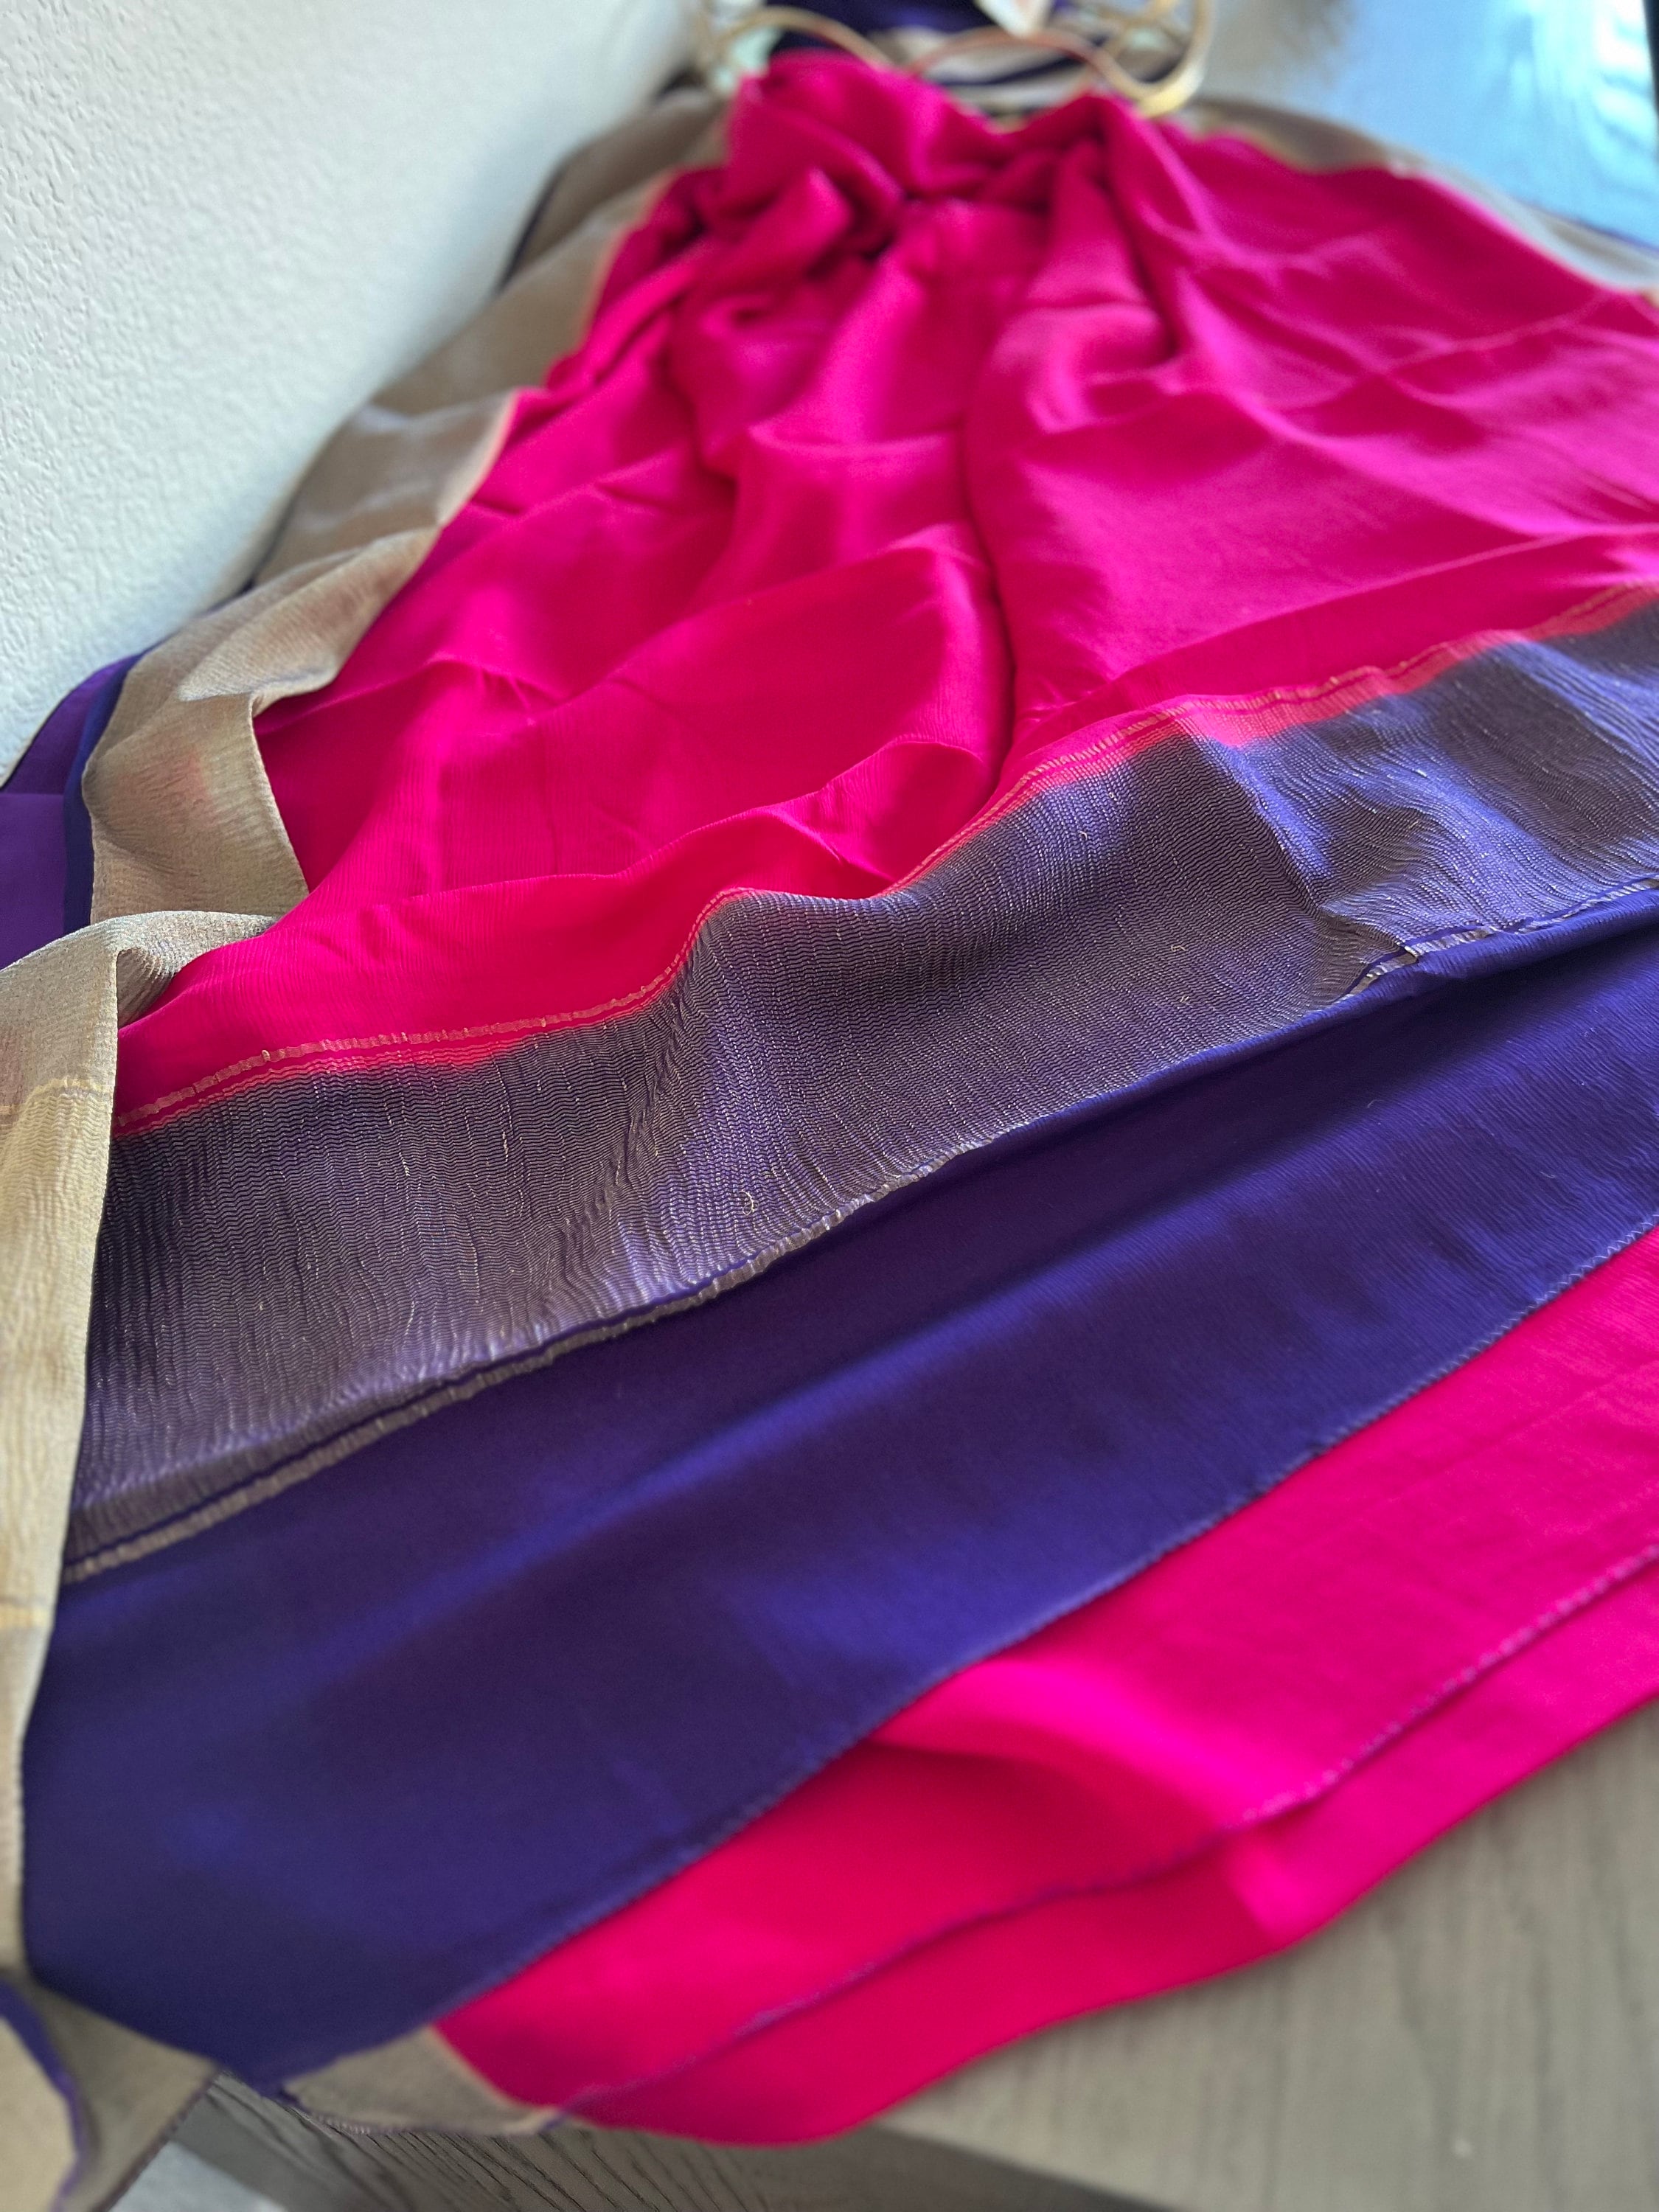 PURE MYSORE SILK CREPE SAREES WITH KSIC... - Shopping Zone BD | Facebook-vietvuevent.vn